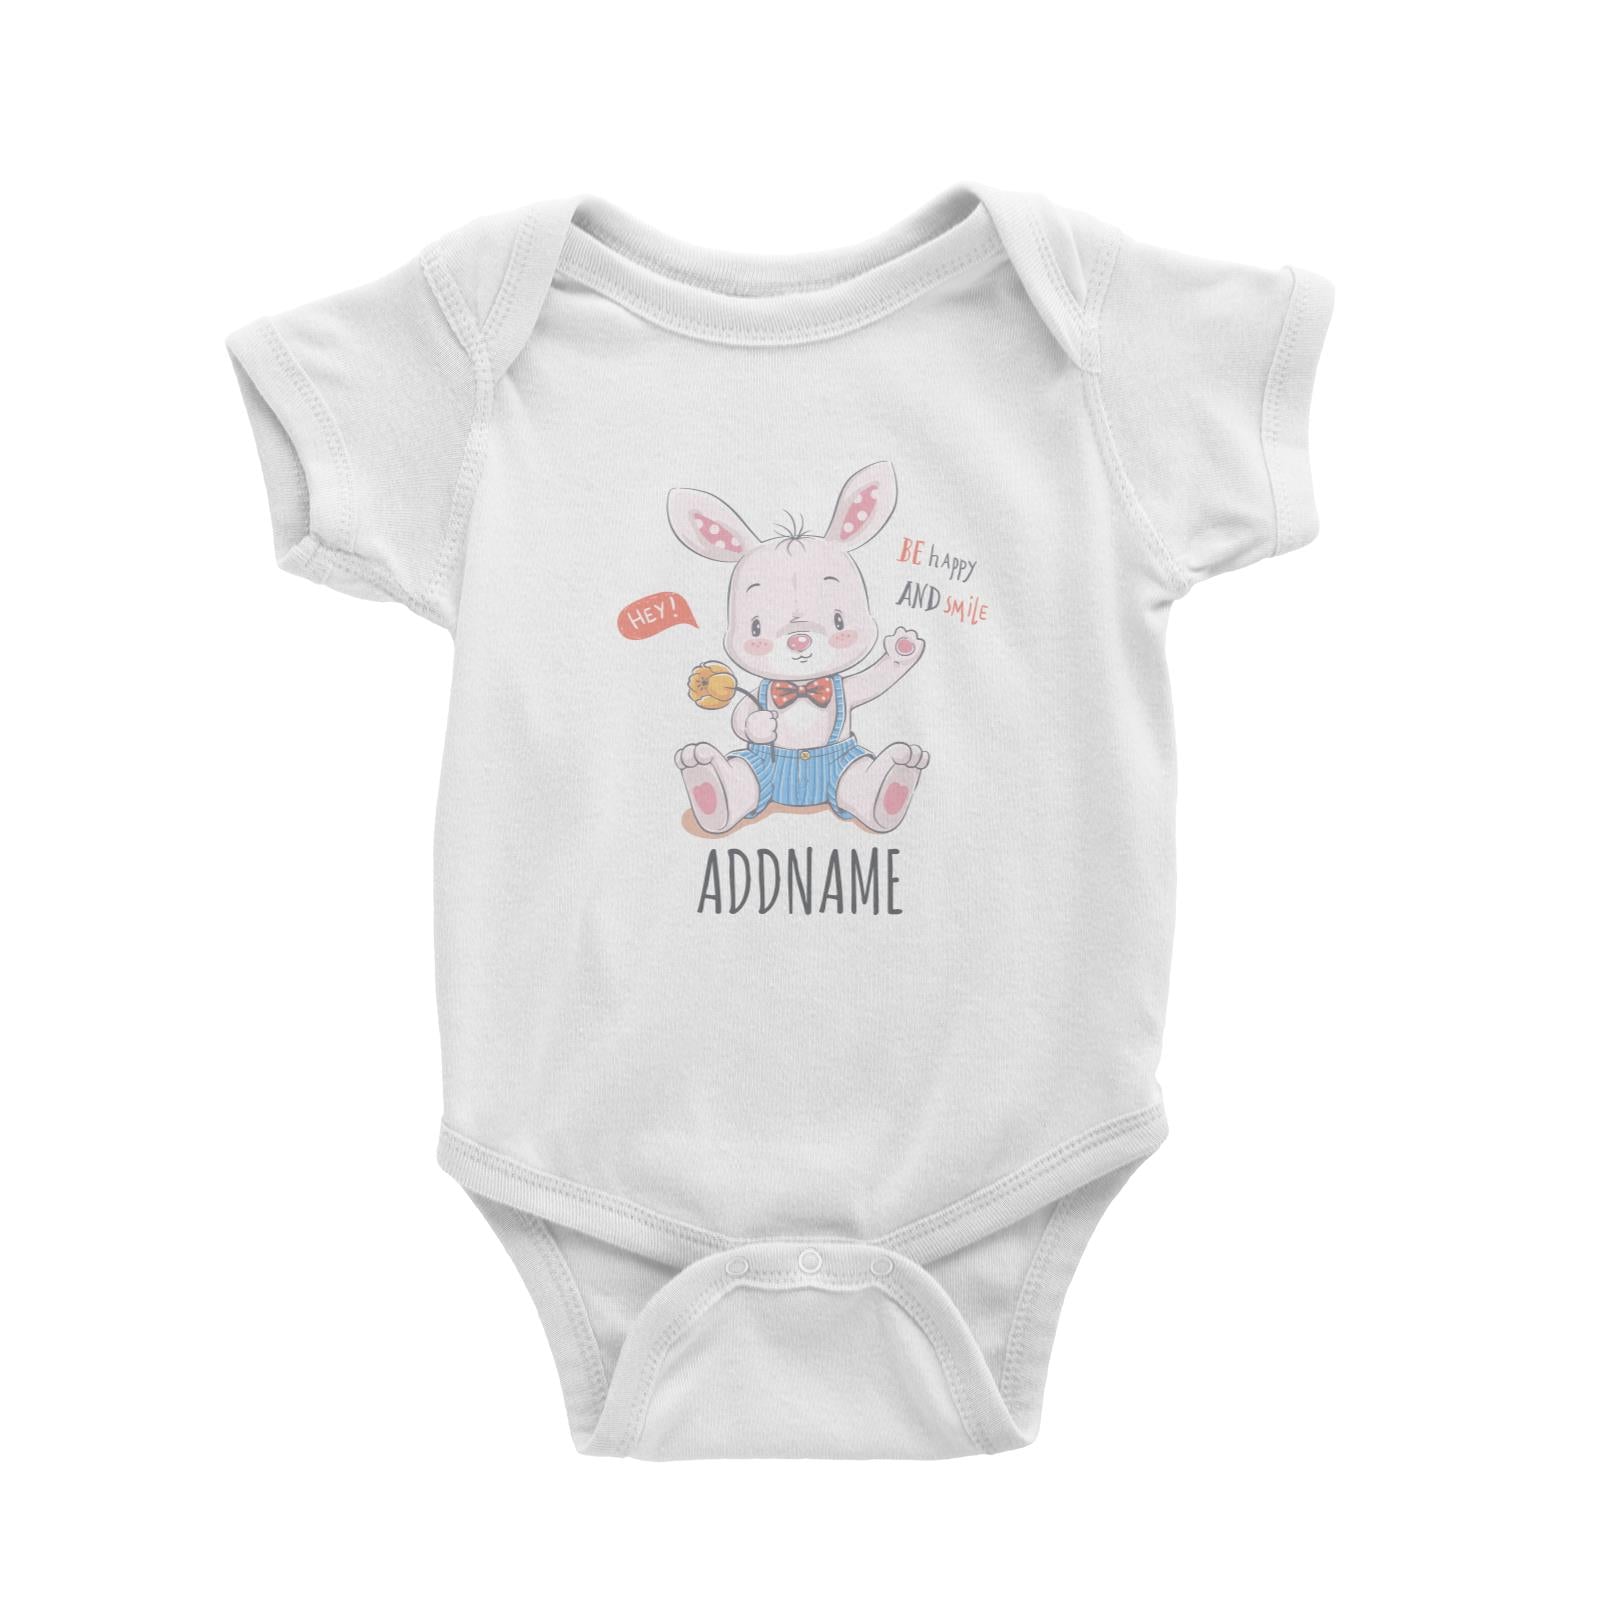 Be Happy and Smile Rabbit White Baby Romper Personalizable Designs Cute Sweet Animal HG